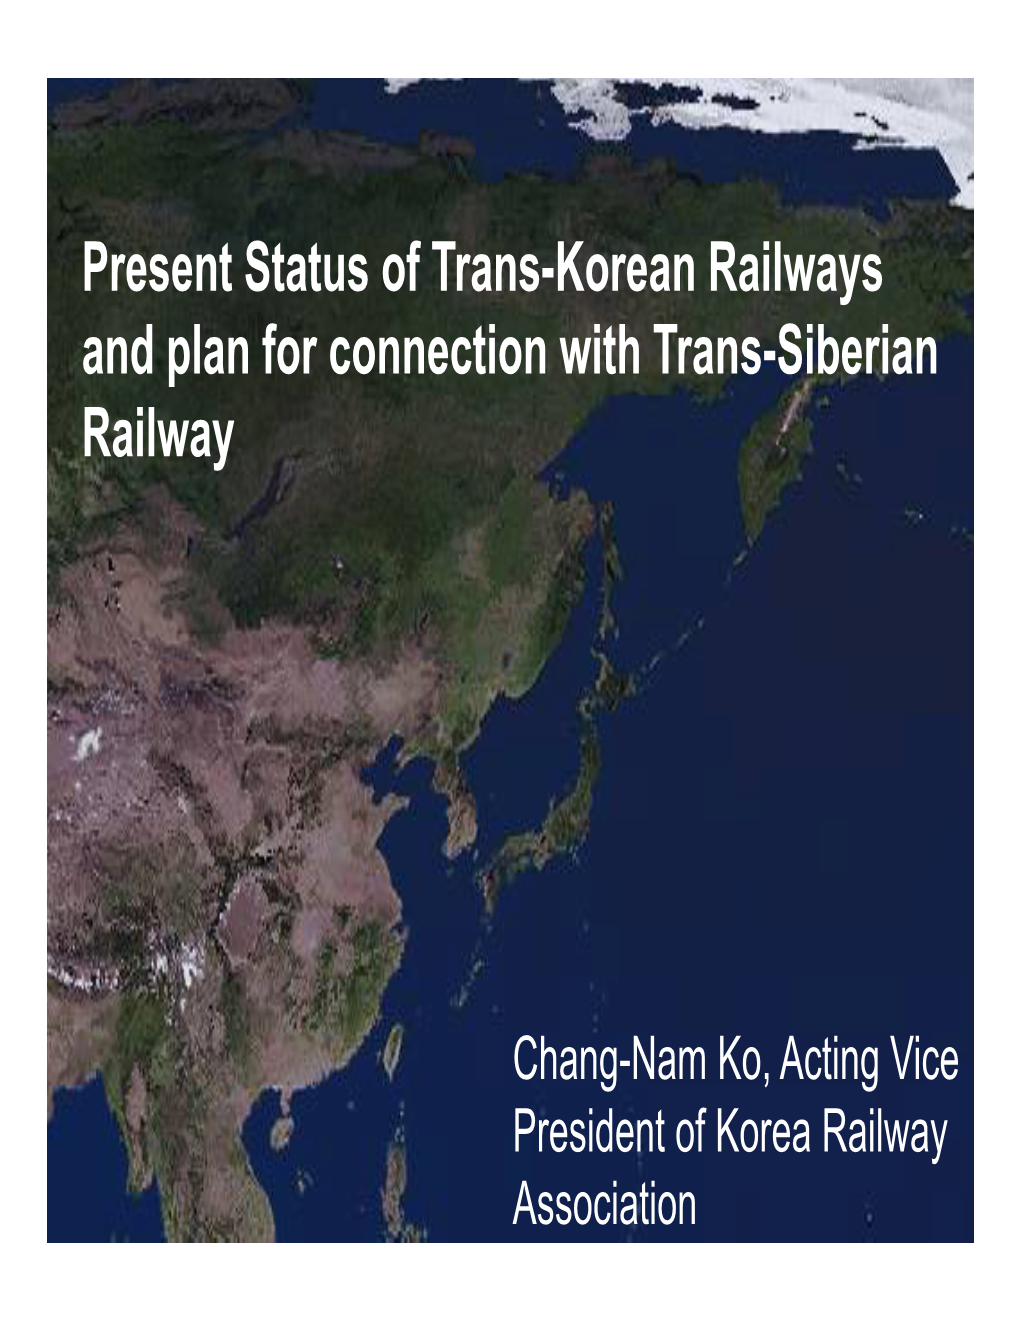 Present Status of Trans-Korean Railways and Plan for Connection with Trans-Siberian Railway